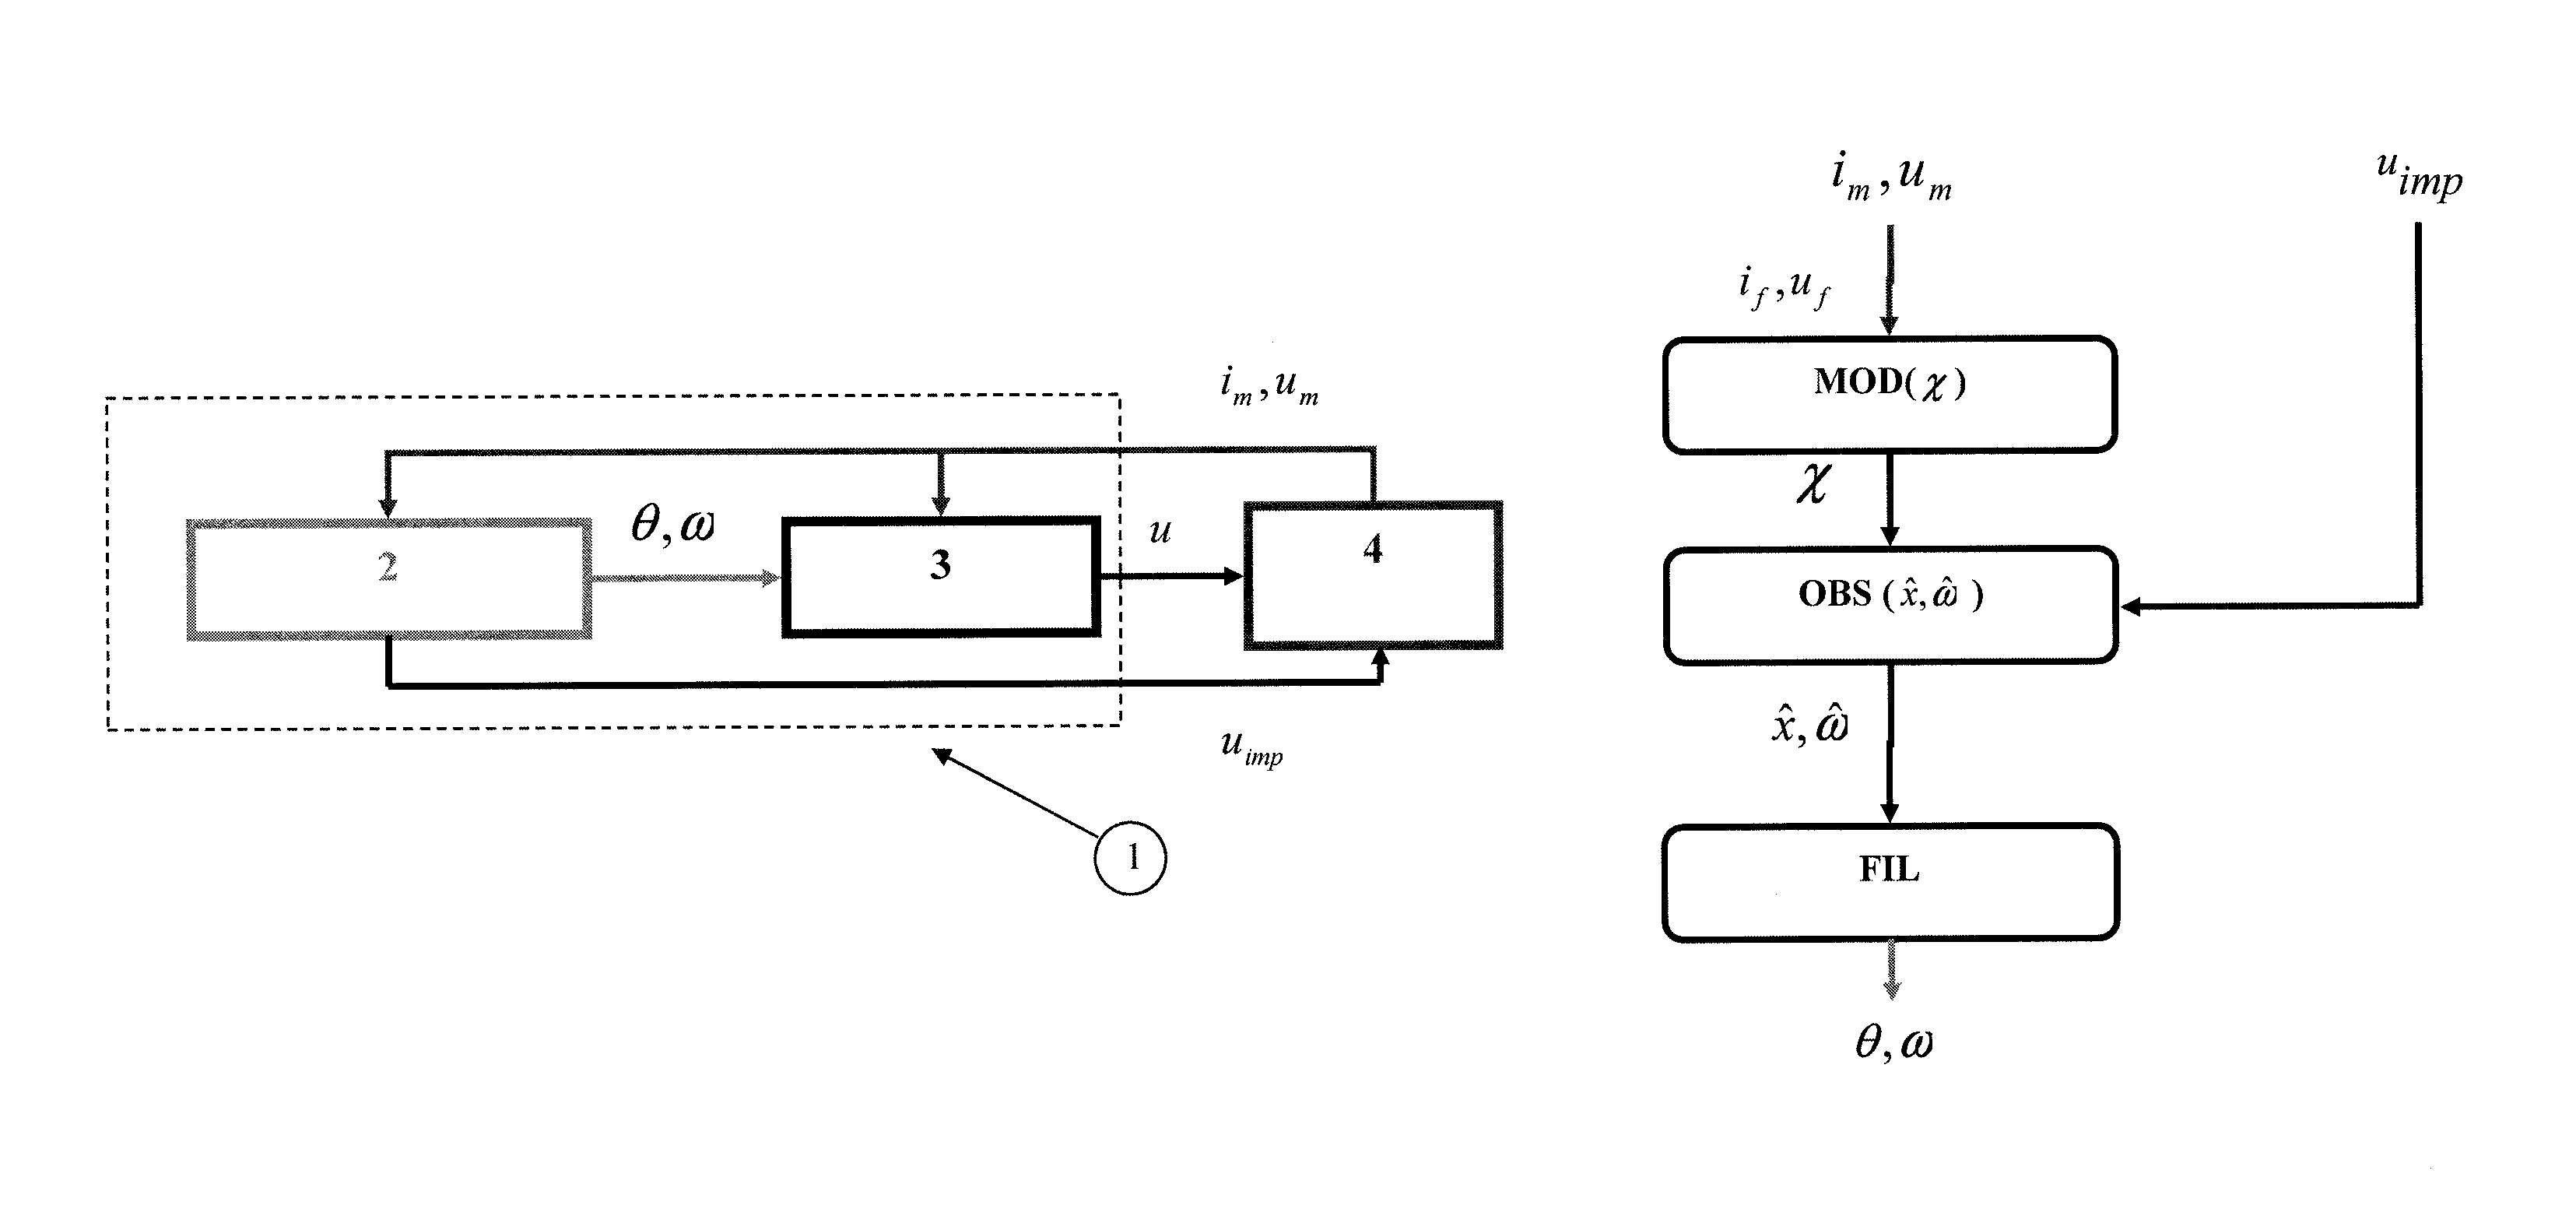 Method of determining the position and the speed of a rotor in a synchronous electric machine using state observers